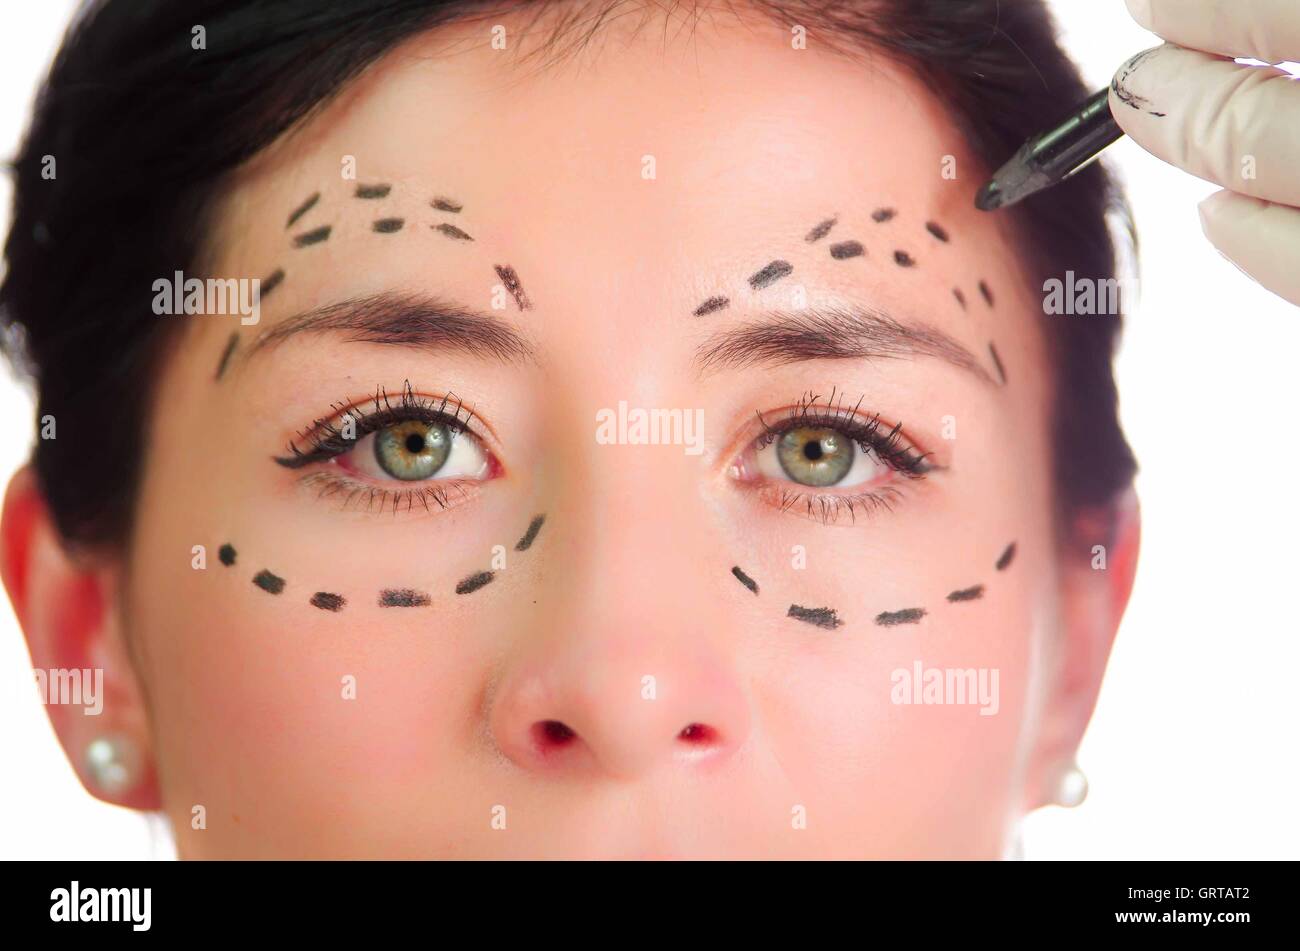 Closeup headshot caucasian woman with dotted lines drawn around eyes looking into camera, preparing cosmetic surgery Stock Photo